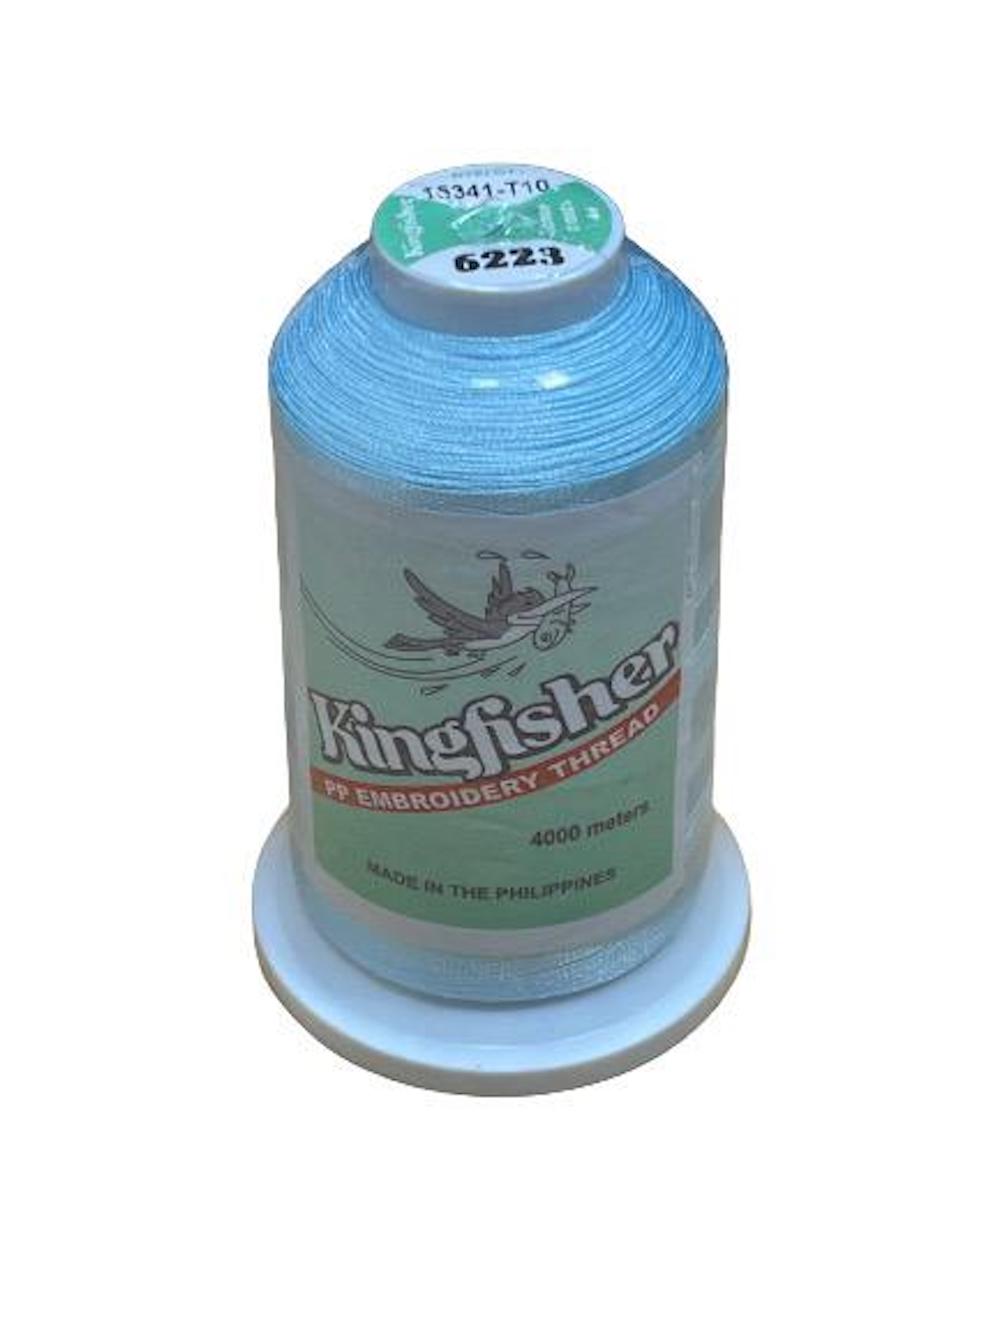 King Fisher Embroidery Thread 4000m 6223 - MY SEWING MALL